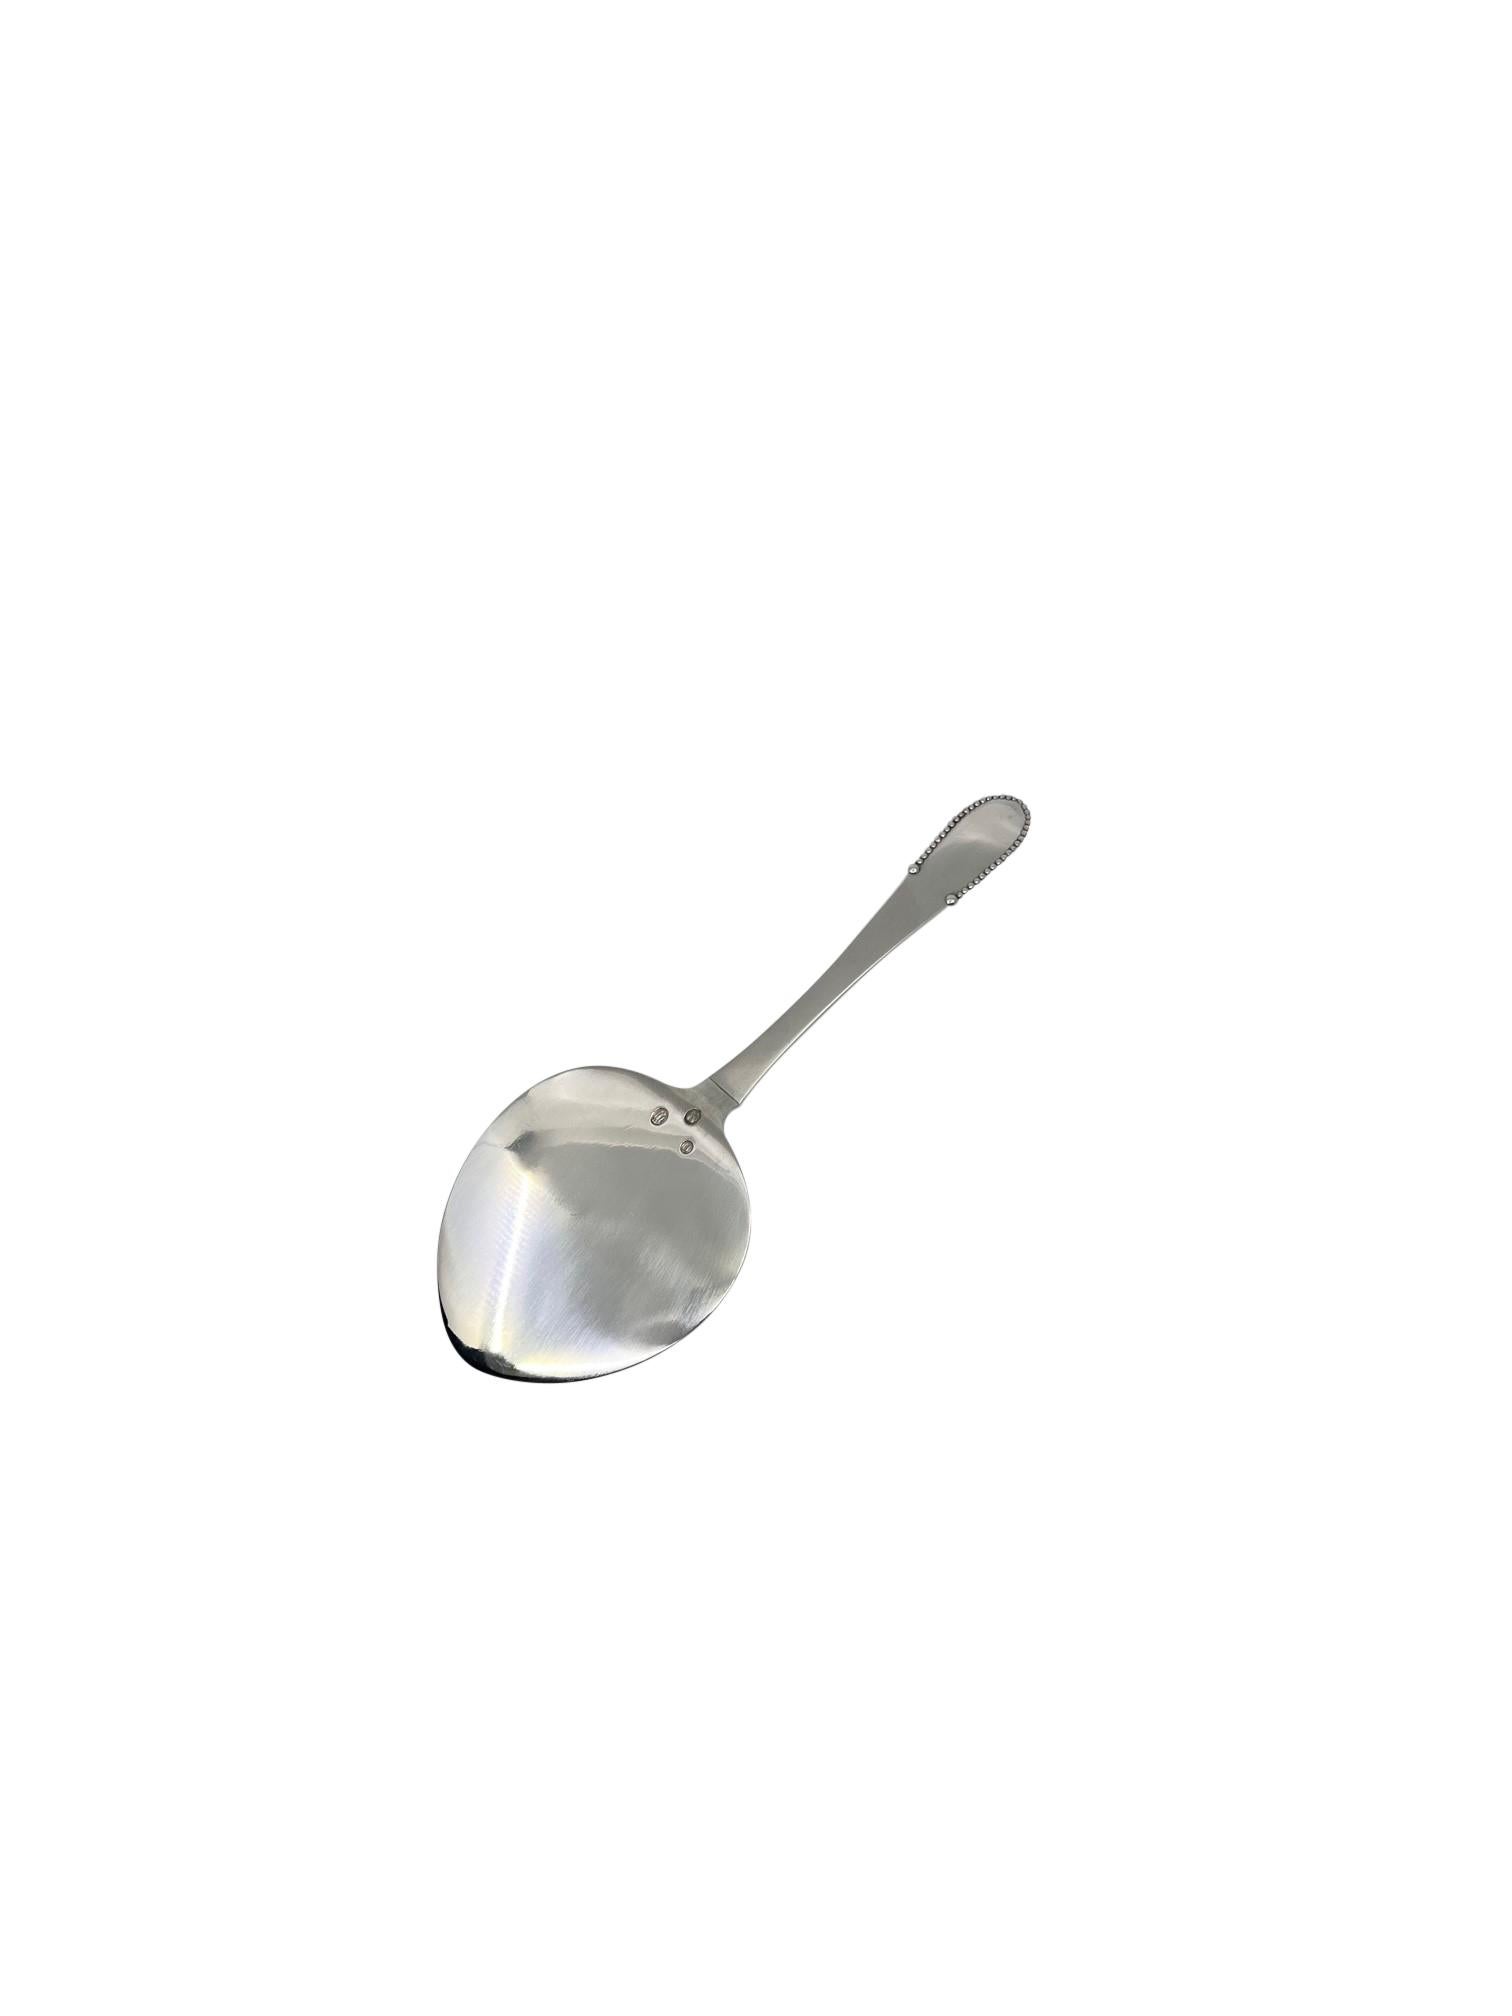 An antique silver Georg Jensen pastry server with hand-chased floral decoration, item #204 in Beaded pattern, design #7 by Georg Jensen from 1916.

Additional information:
Material: Sterling silver
Style: Art Nouveau
Hallmarks: With vintage Georg